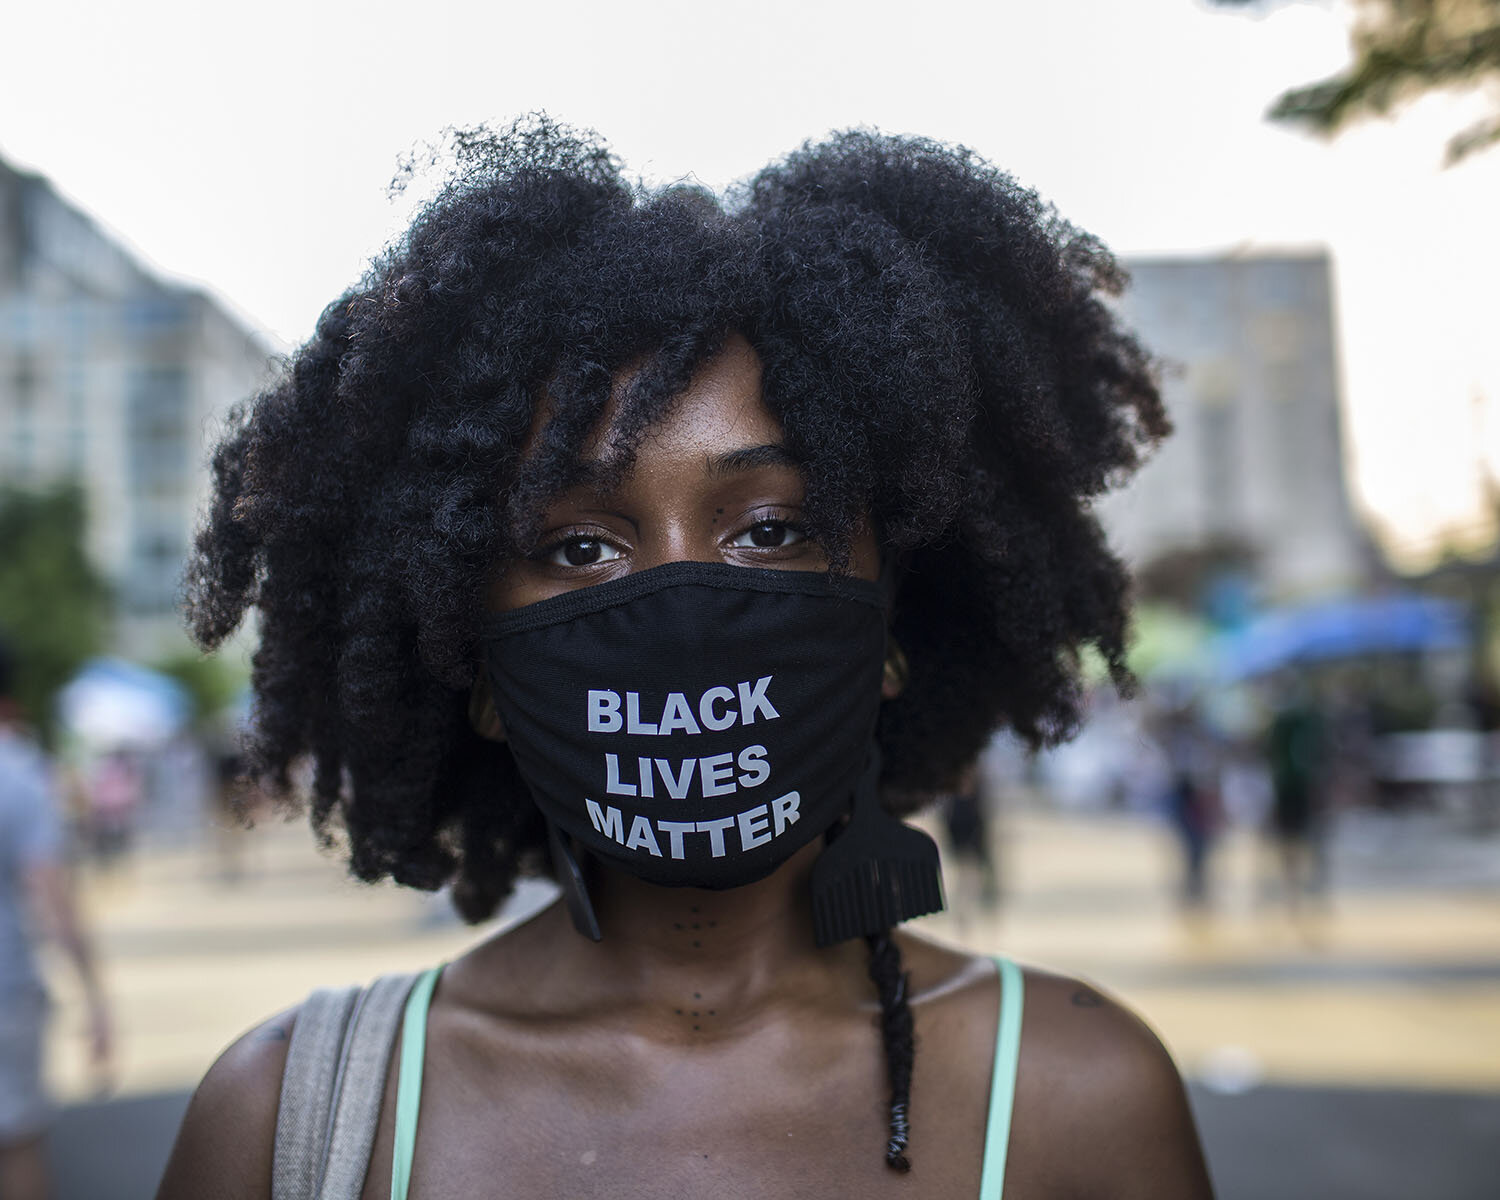  Name:  Tiaret Mitchell   Occupation: Tattoo artist  Date and Place the photo was taken: June 19, 2020, Black Lives Matter Plaza, Washington DC, U.S.A.  Her Statement:  “I’m glad to be apart of this current revolutionary state. It’s time for the tabl